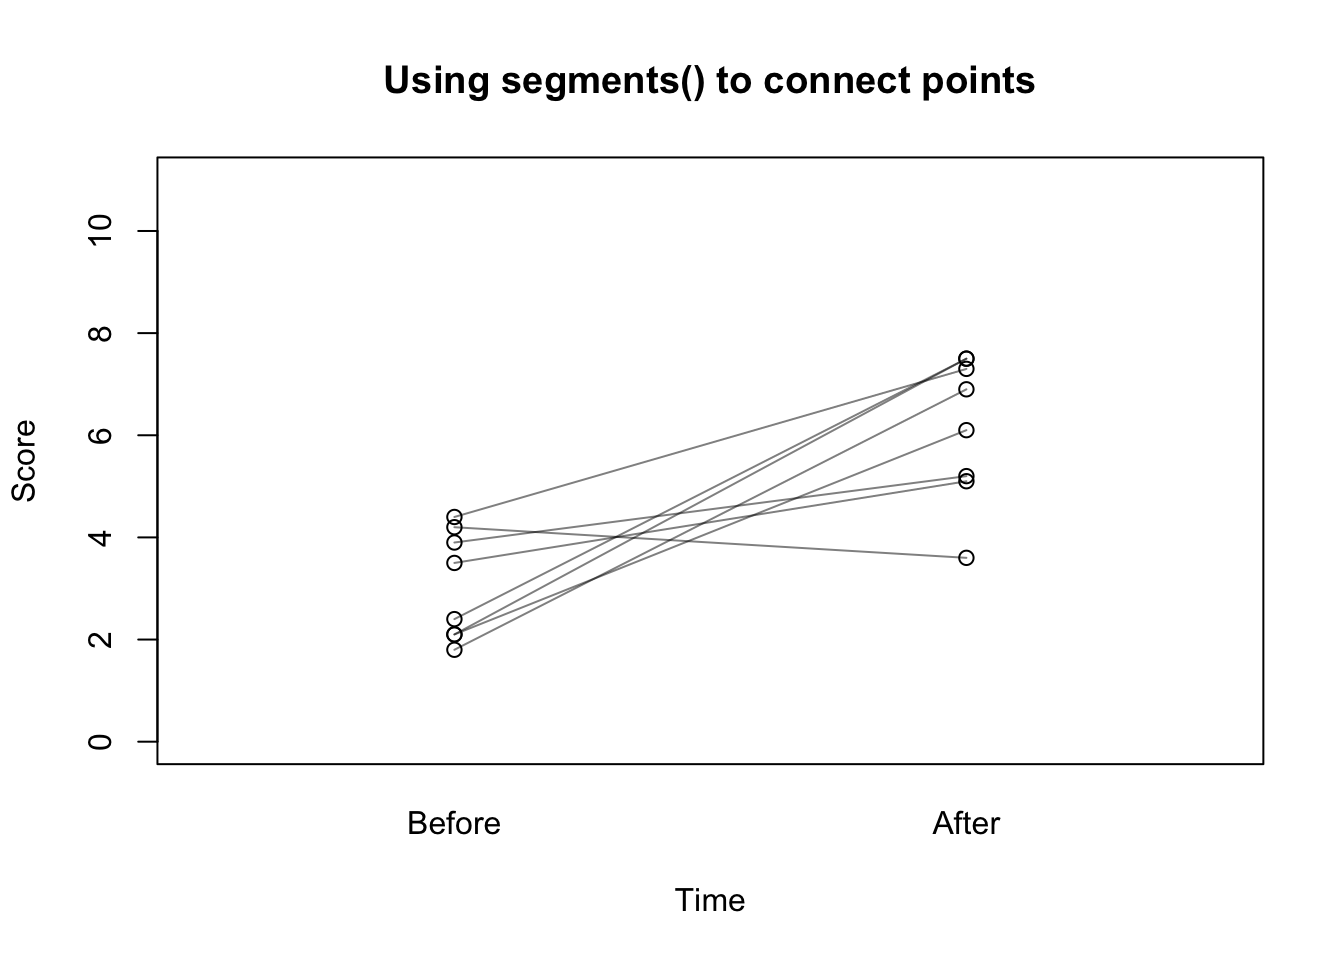 Connecting points with segments().